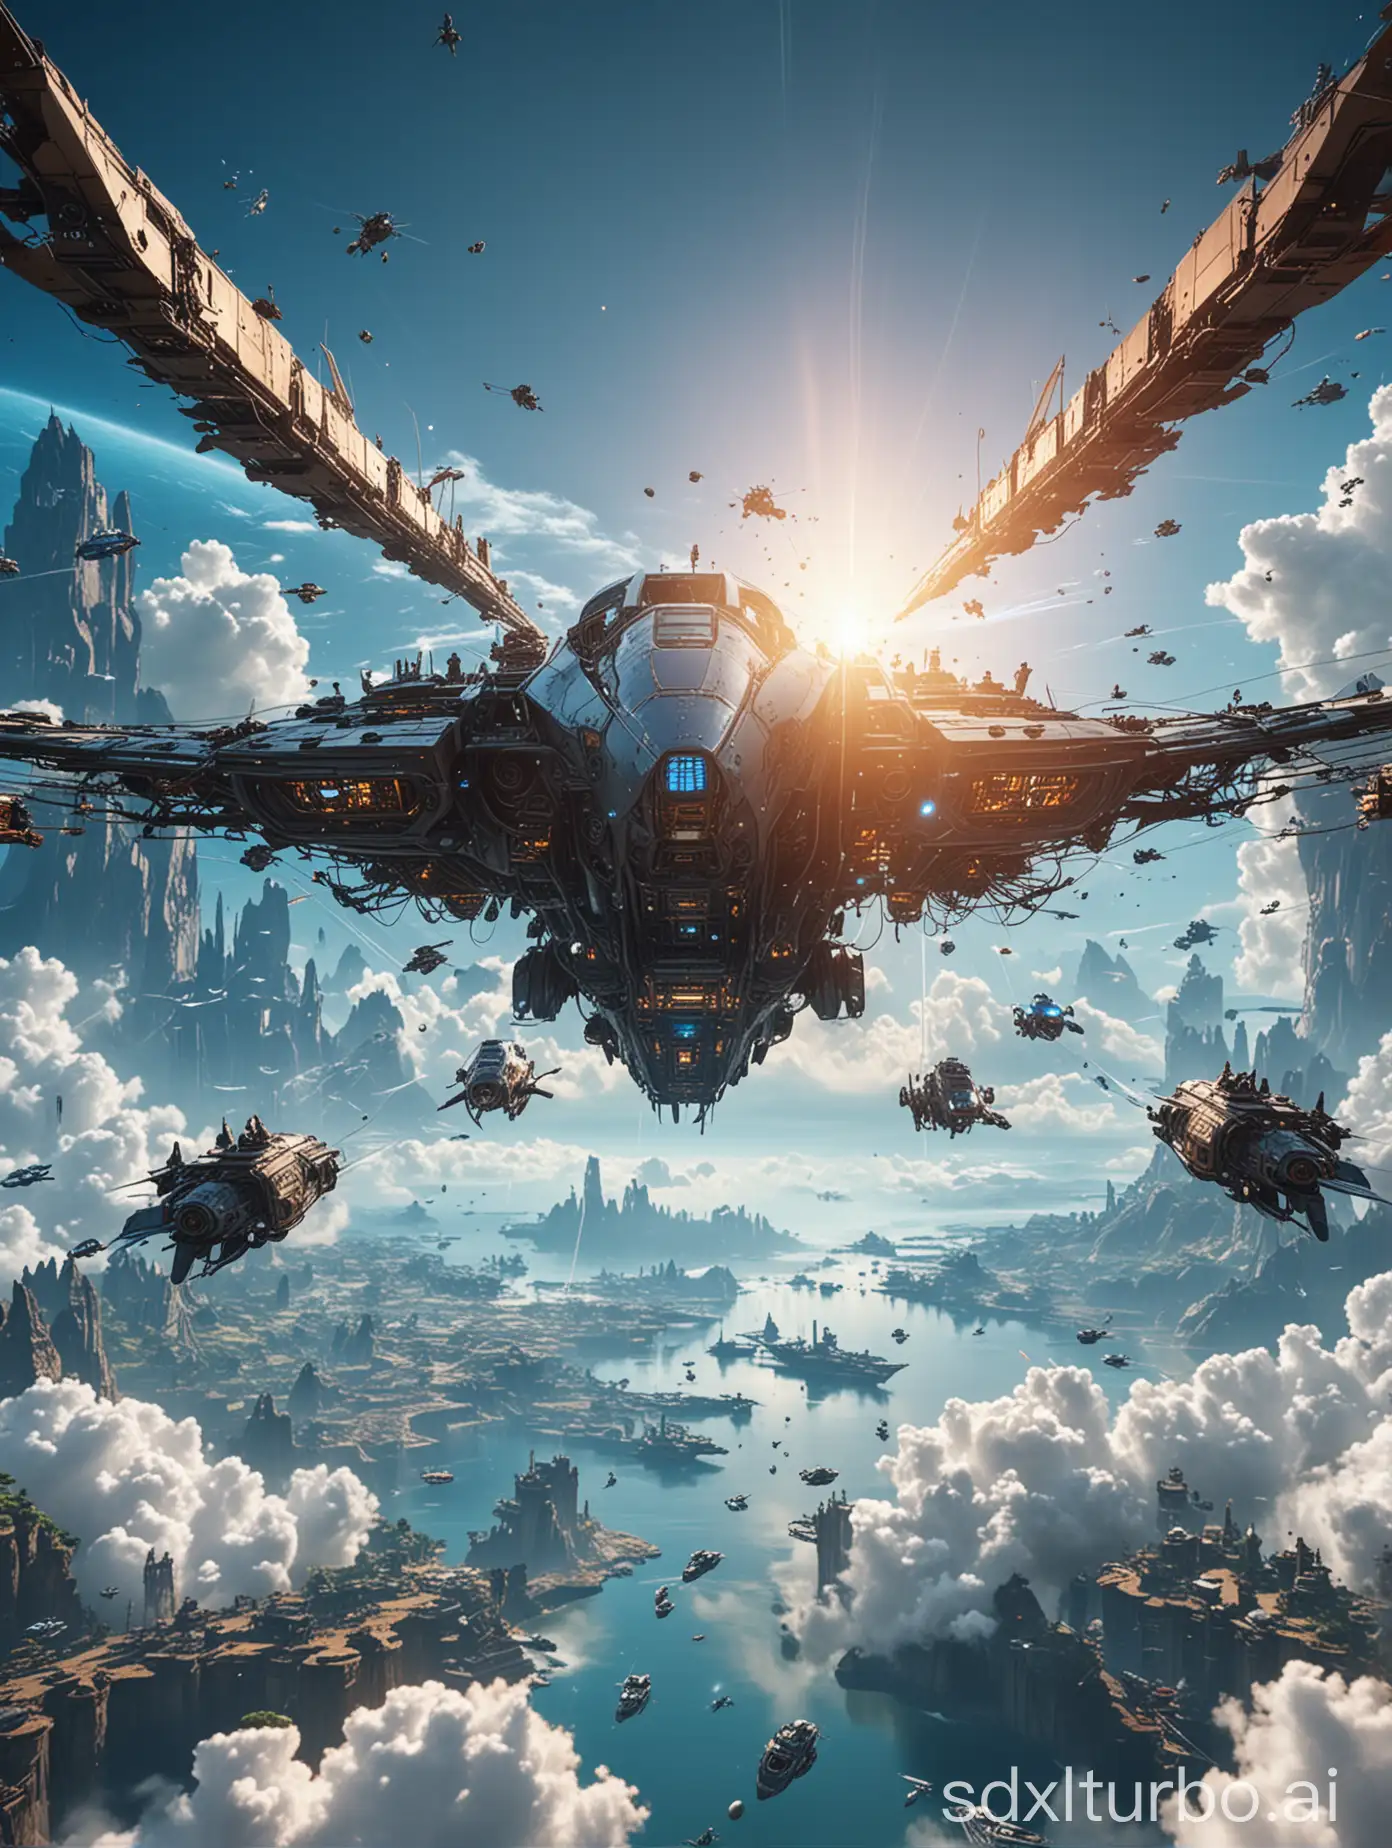 Future world, people open flying ships in the azure sky, machinery, Earth, laser, lively scene, fragments, armor, wires, magnificent, omnipresent, cinematic level scene, virtual space, 8k